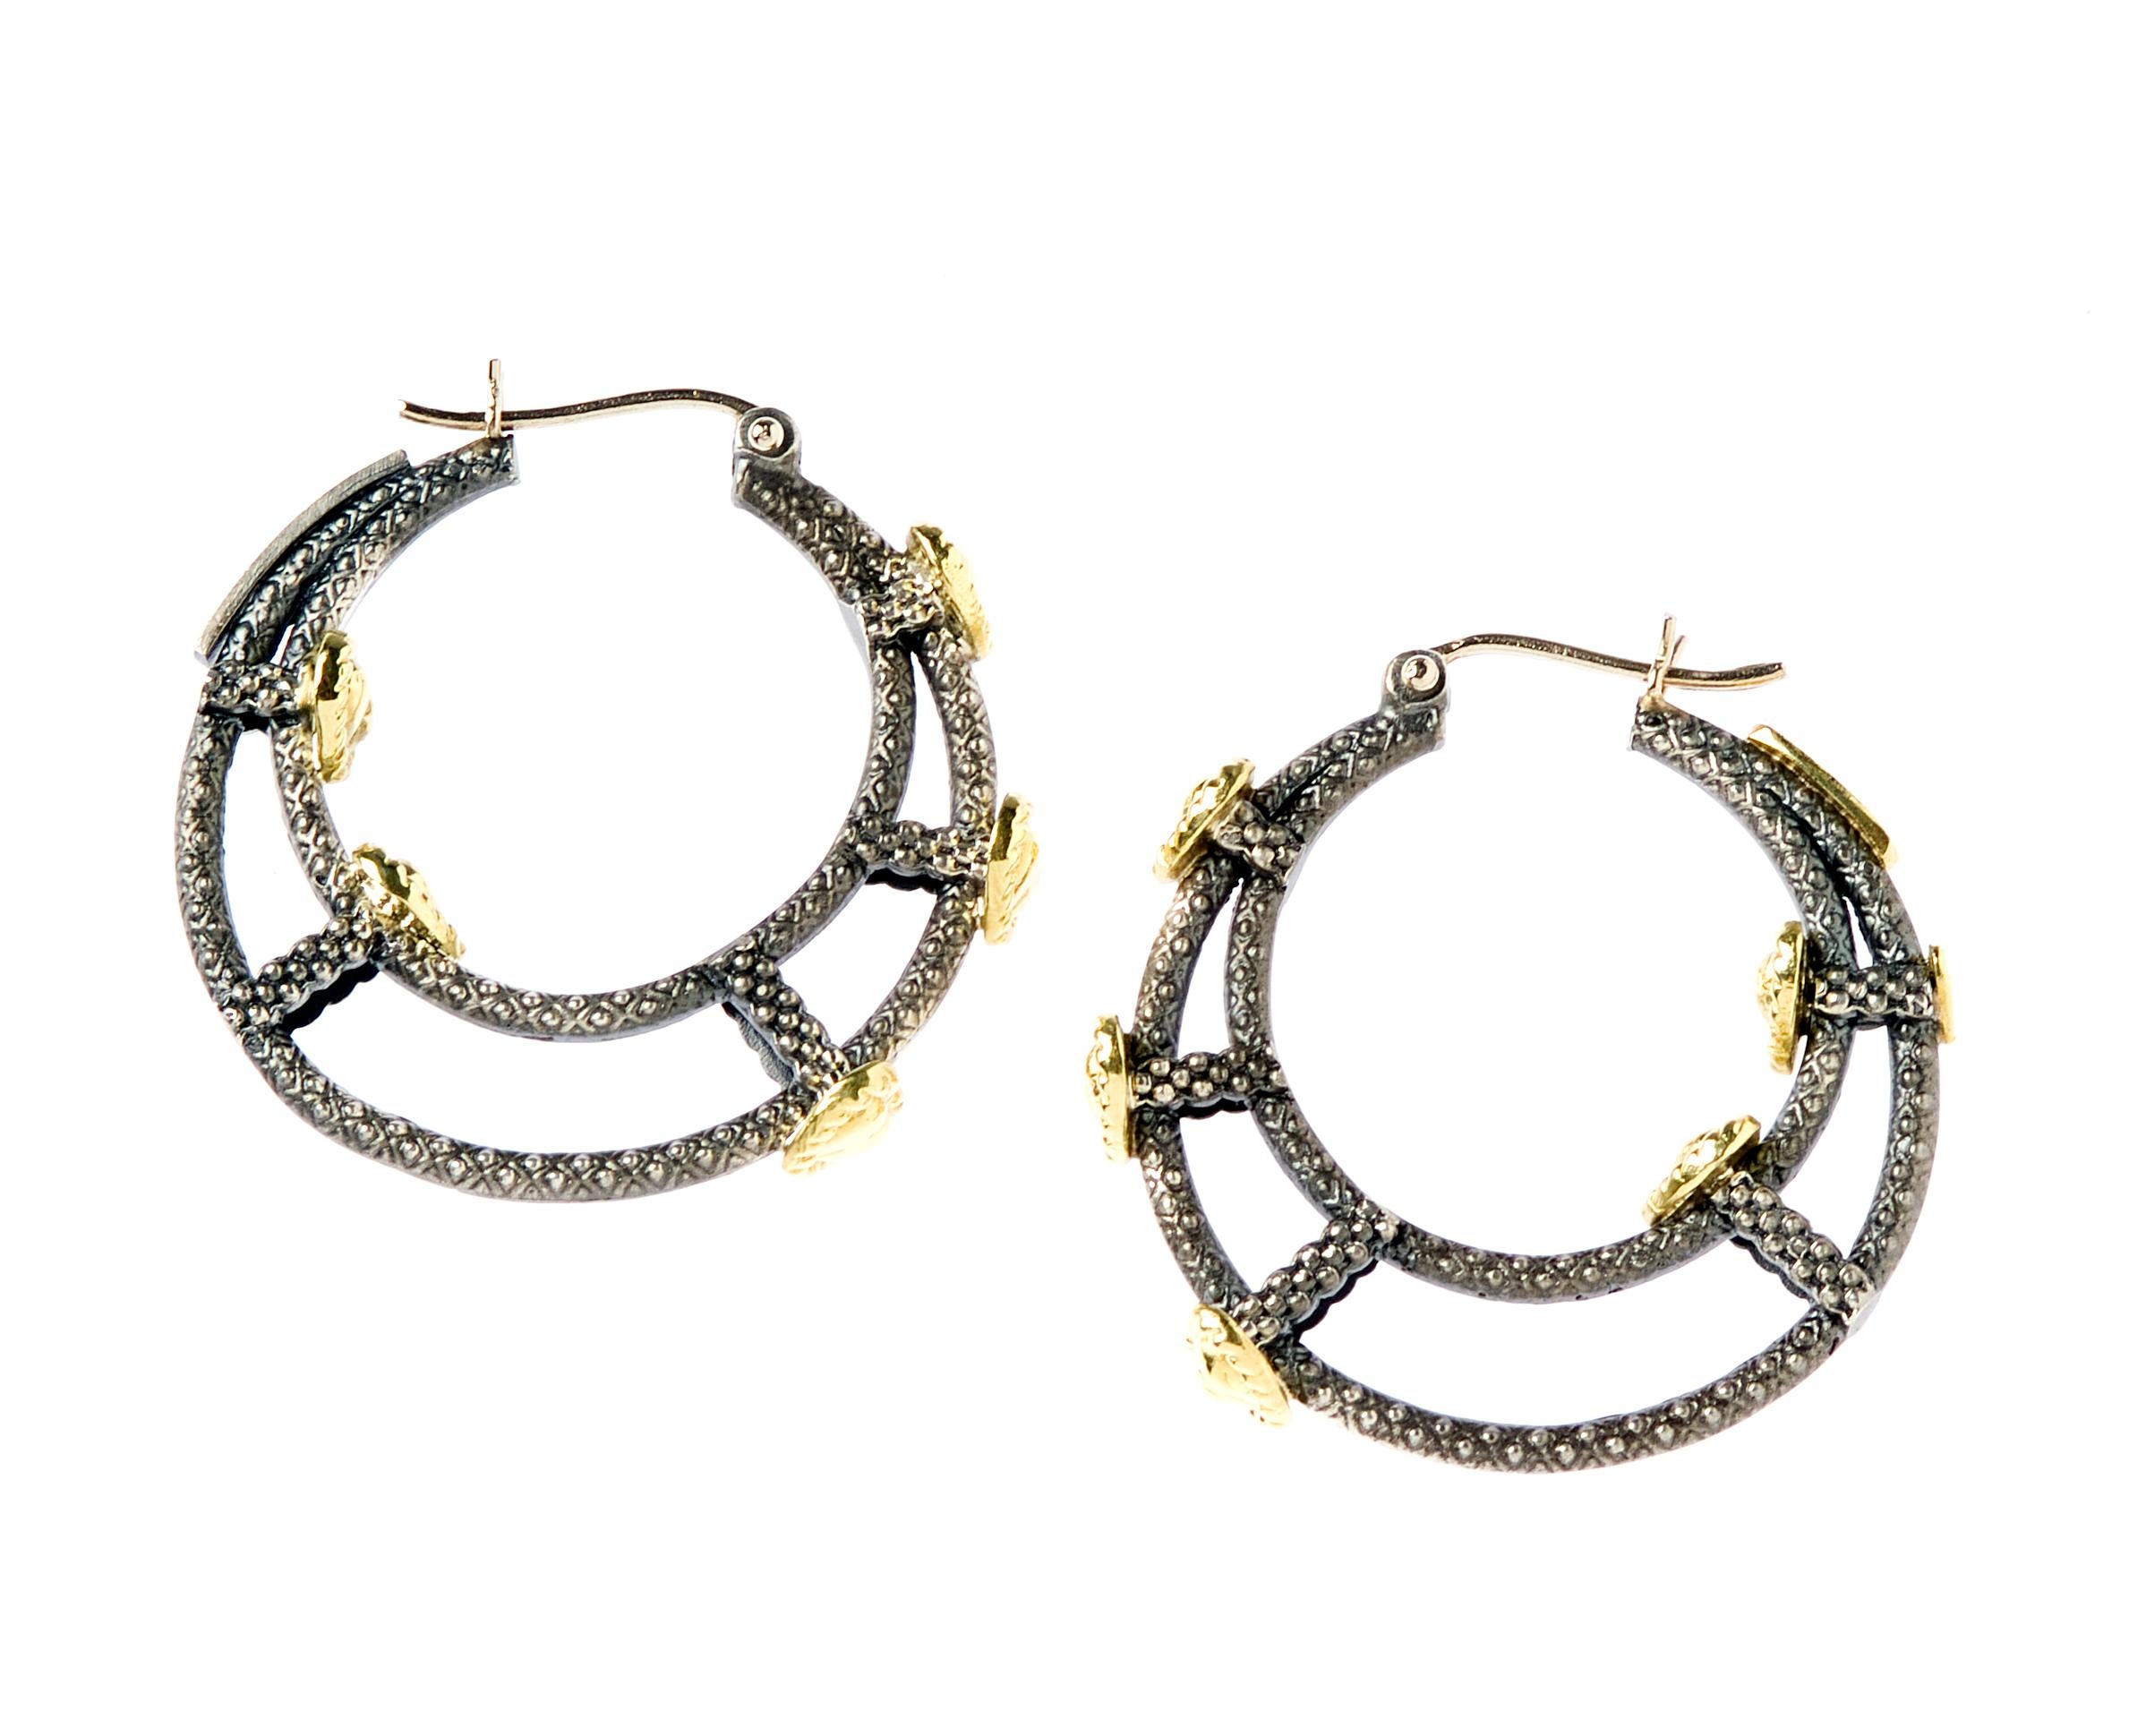 IF YOU ARE REALLY INTERESTED, CONTACT US WITH ANY REASONABLE OFFER. WE WILL TRY OUR BEST TO MAKE YOU HAPPY!

Aged Silver & 18K Gold Inside-out Hoop Earrings with Hearts by Stambolian

These are the 